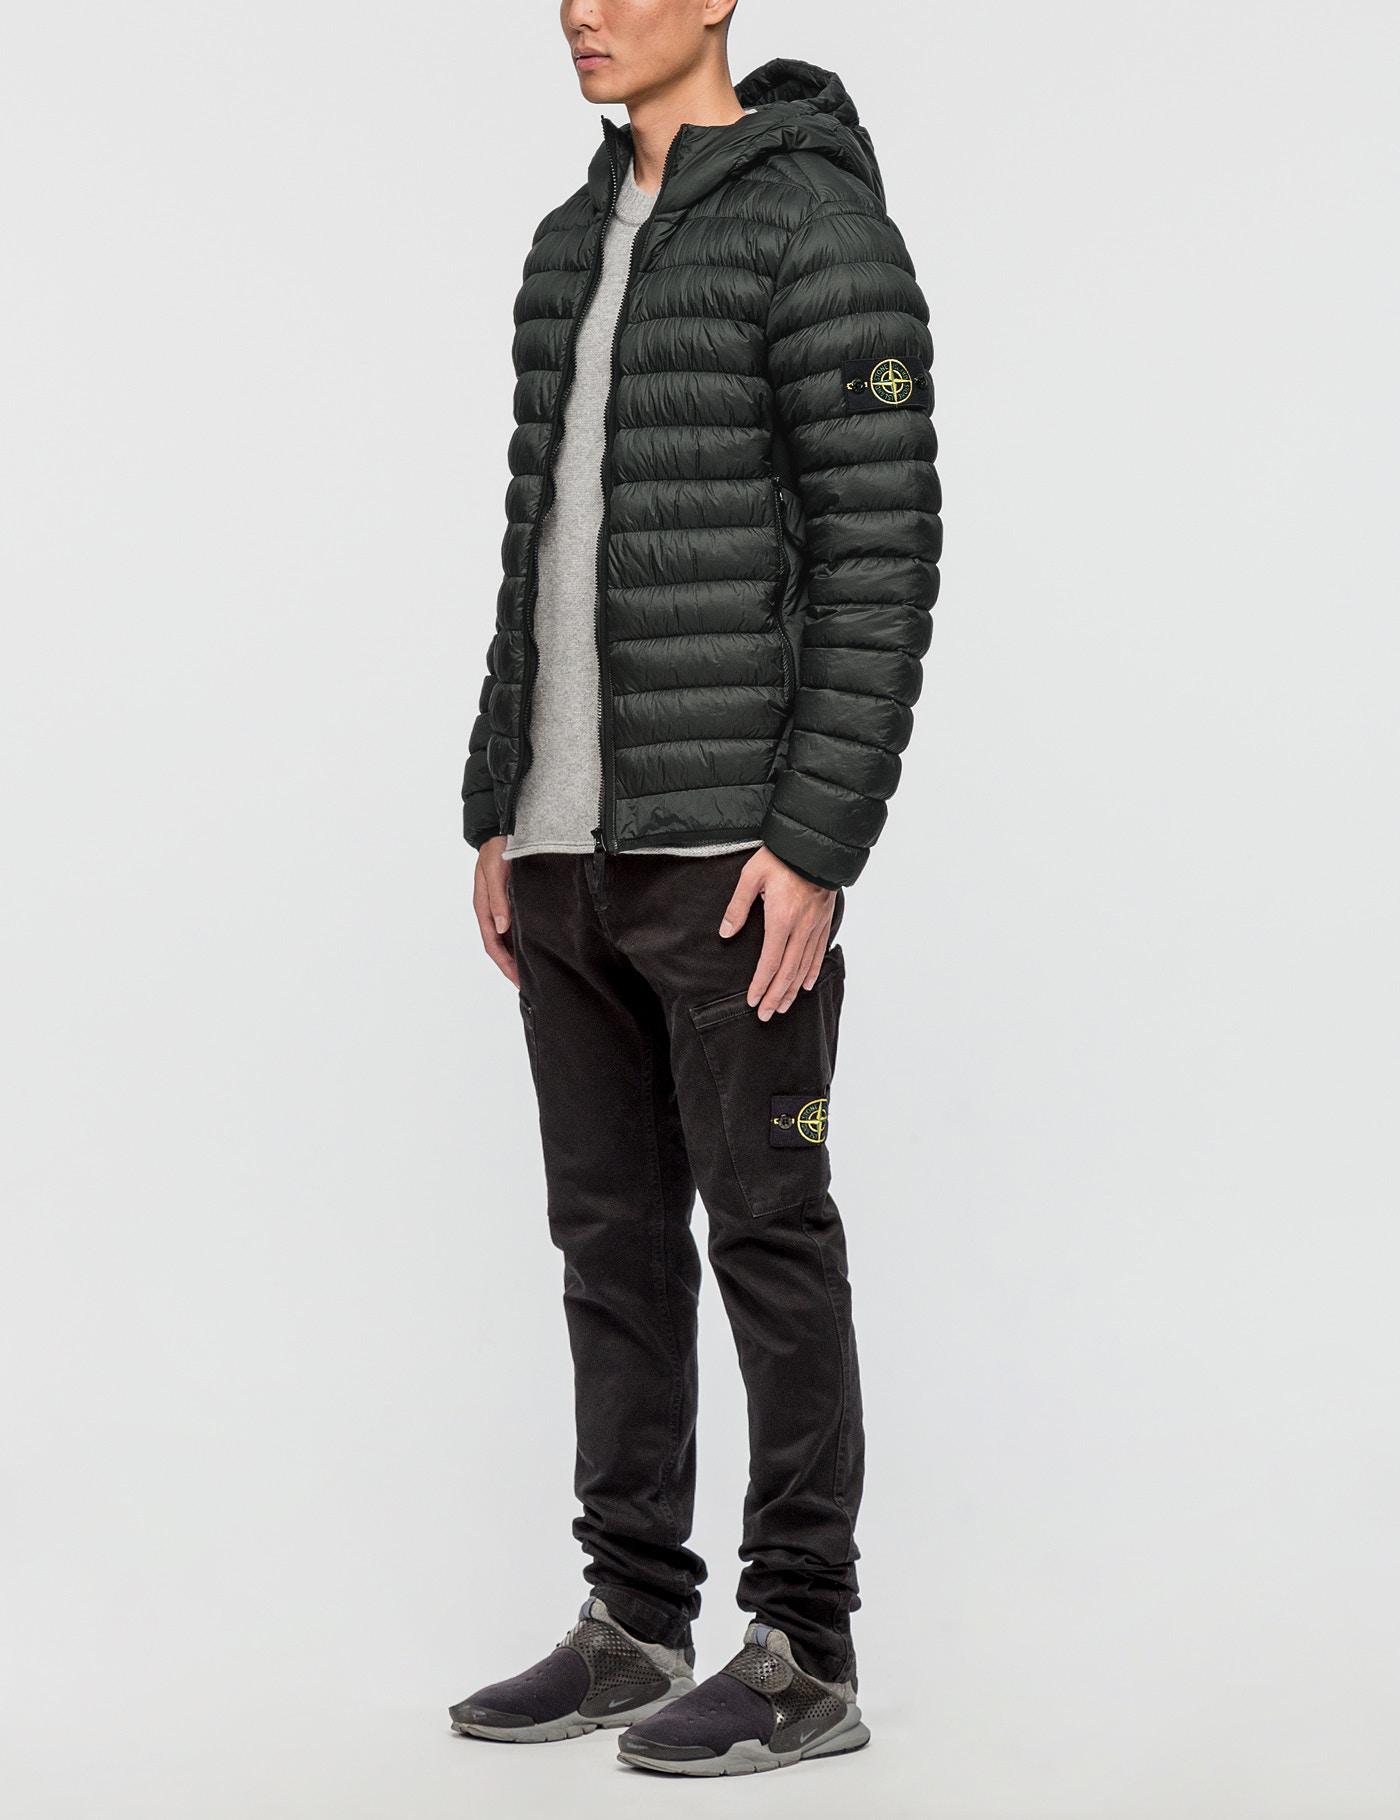 Stone Island Garment Dyed Micro Yarn Hooded Down Jacket in Black for Men -  Lyst